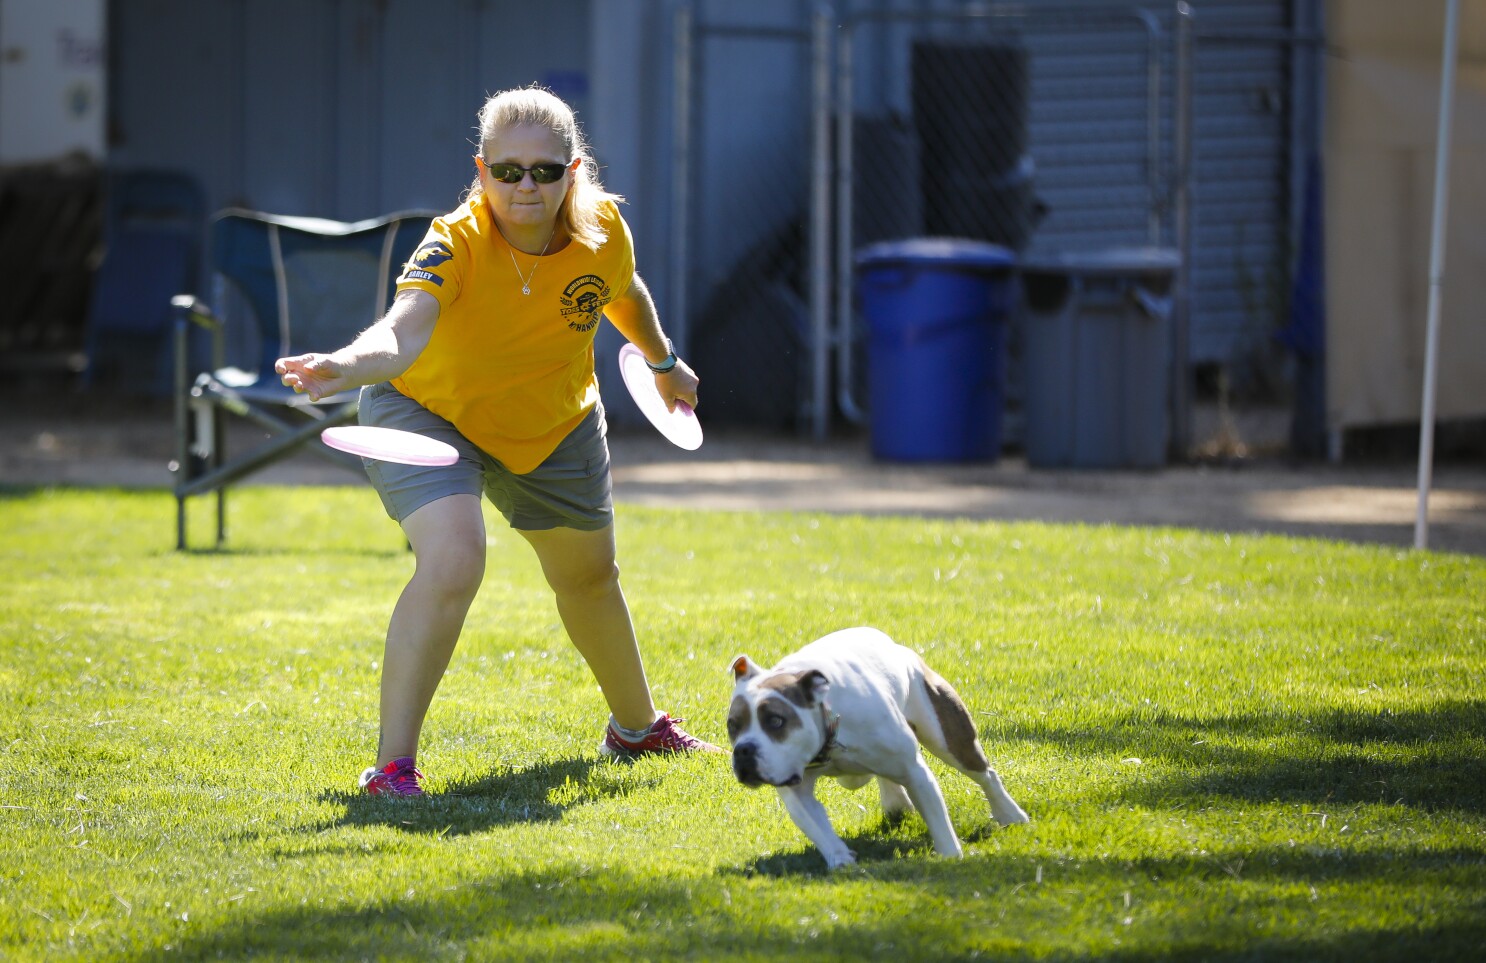 Frisbee Catching Dogs Compete For International Fame In Valley Center The San Diego Union Tribune